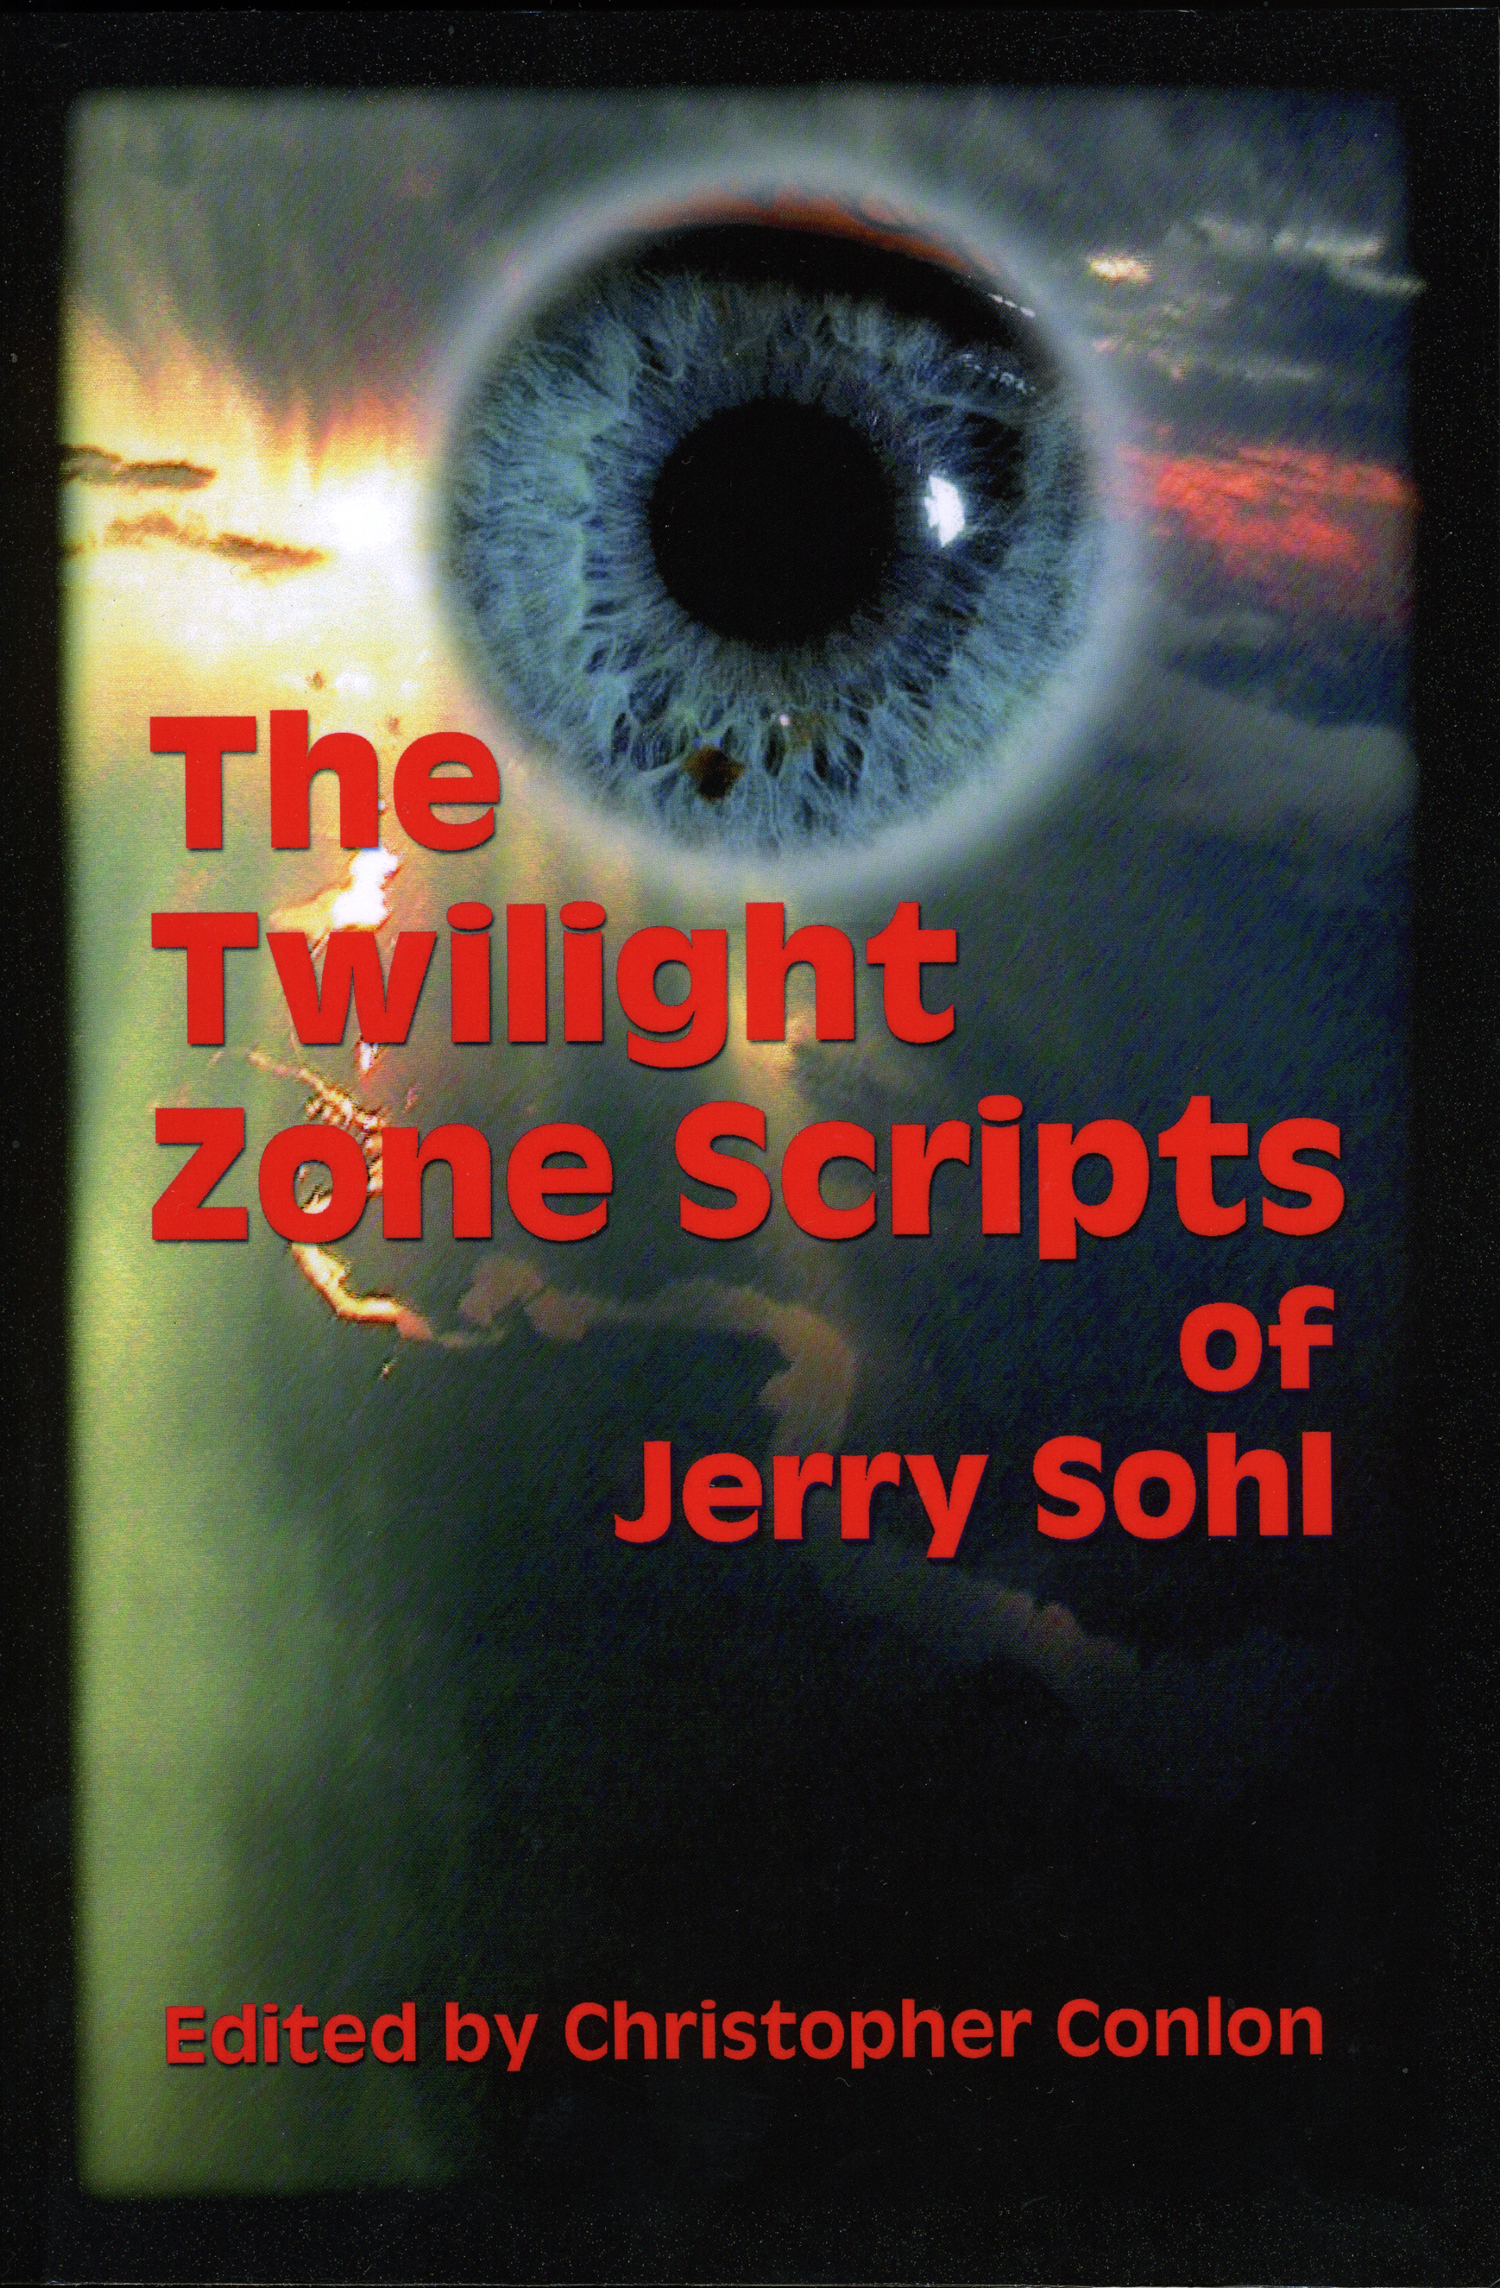 The Twilight Zone Scripts of Jerry Sohl